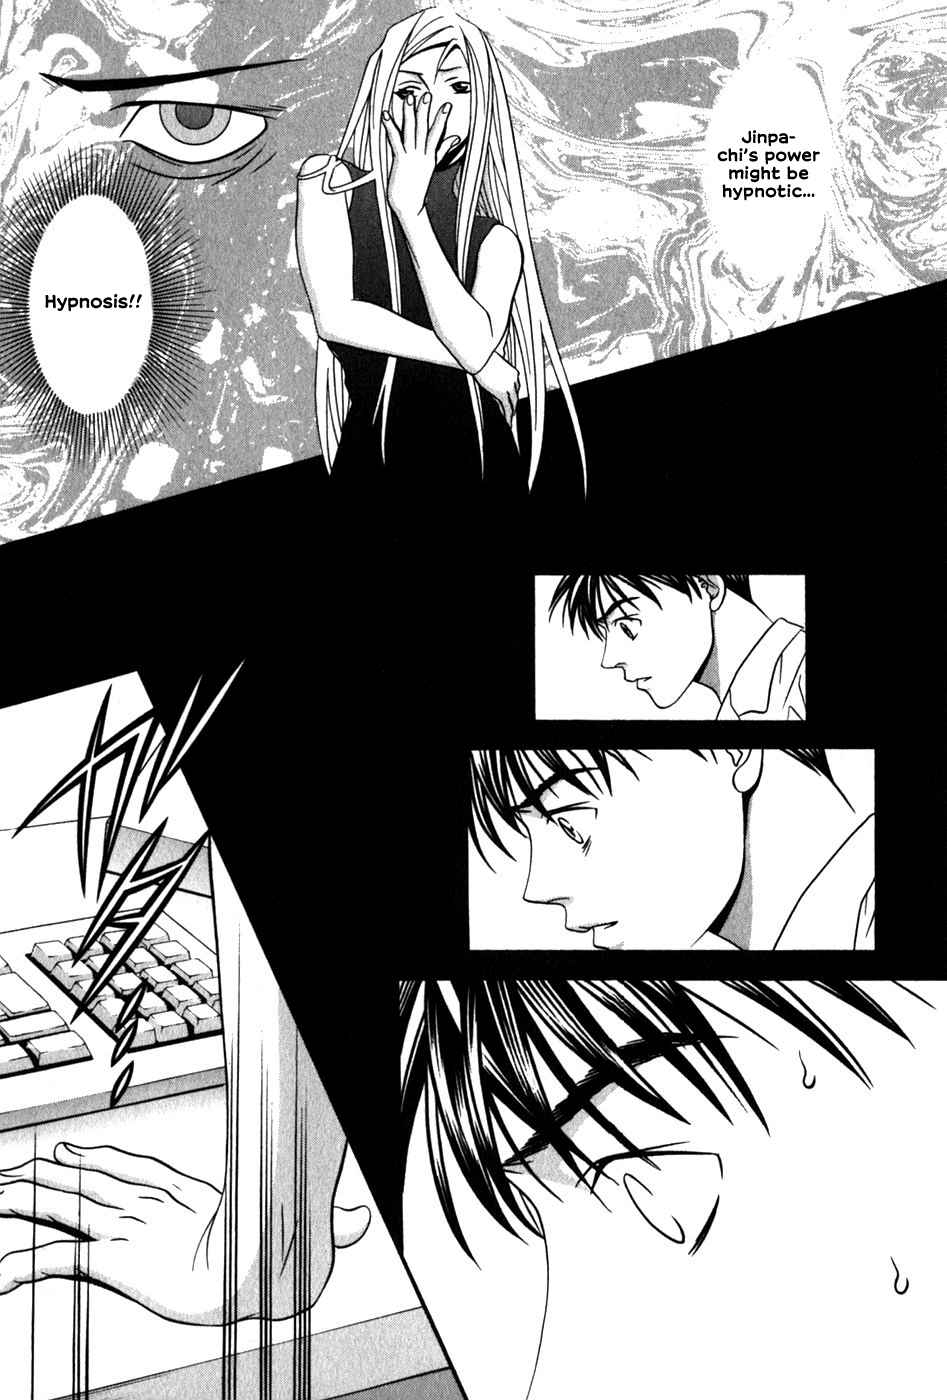 Perfect Twin Vol. 5 Ch. 43 Hypnosis